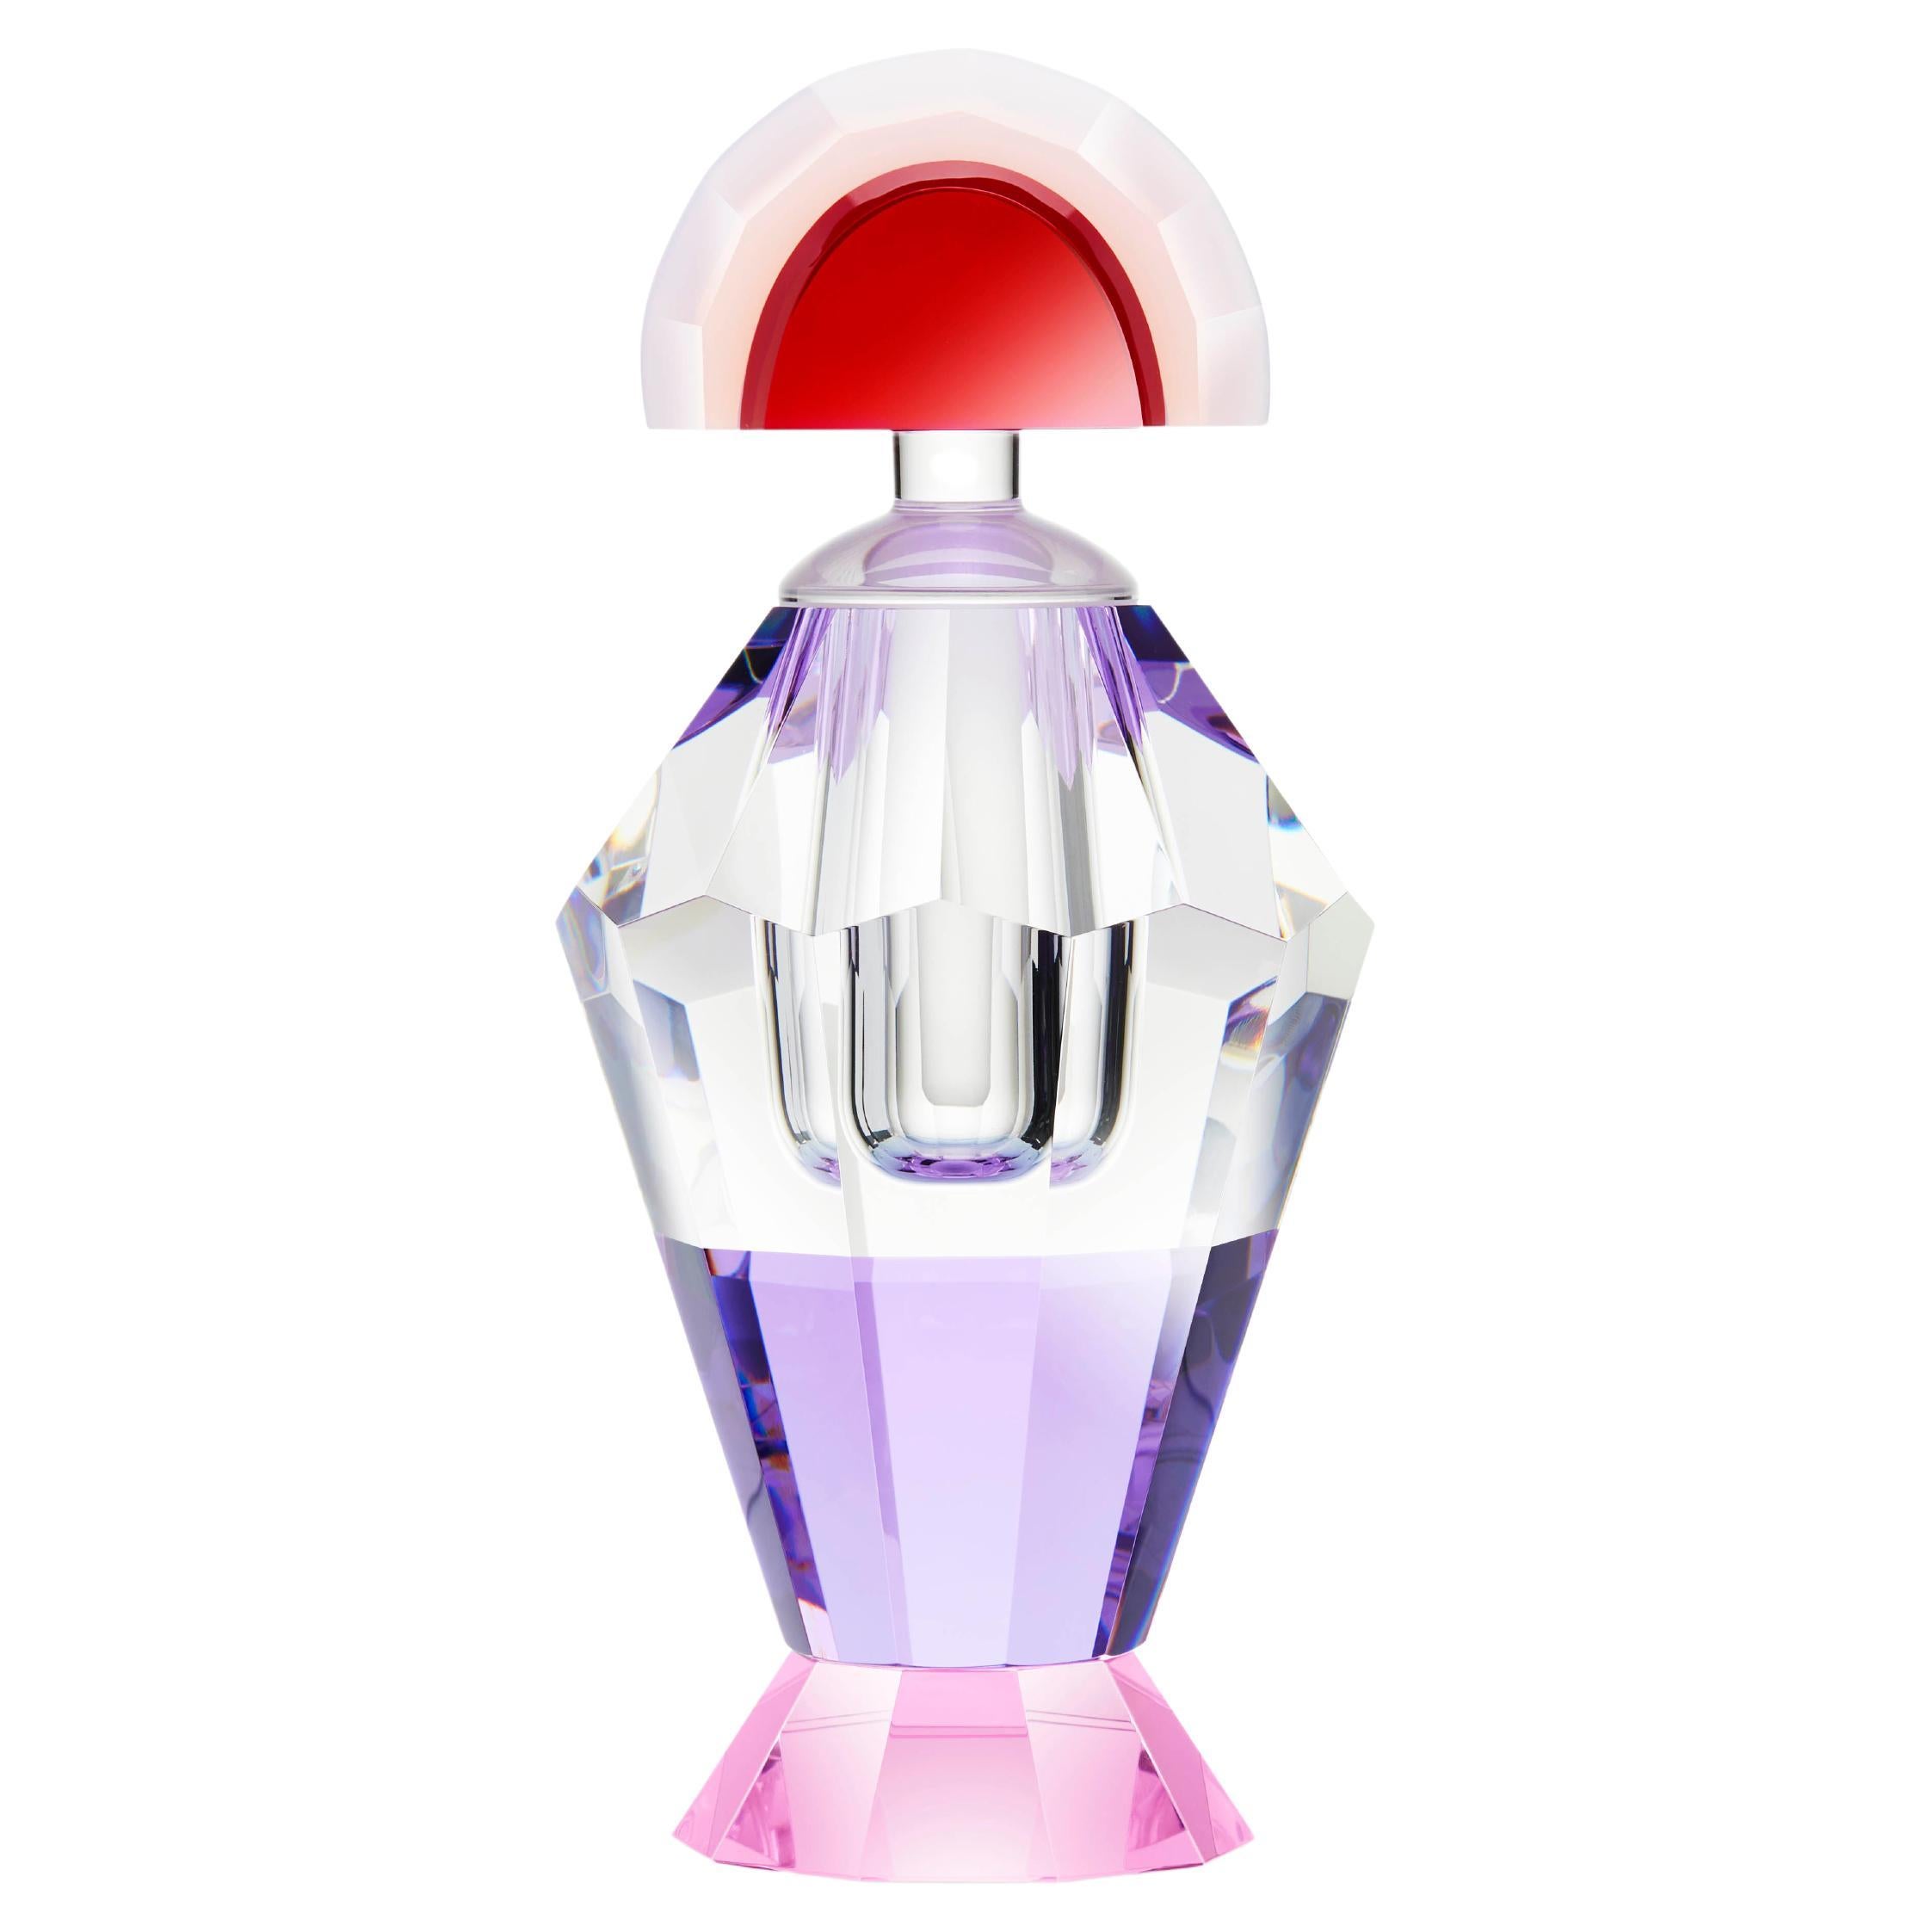 Grand Belleville Perfume Flacon, Extravagant Grand Crystal Perfume Flacons For Sale